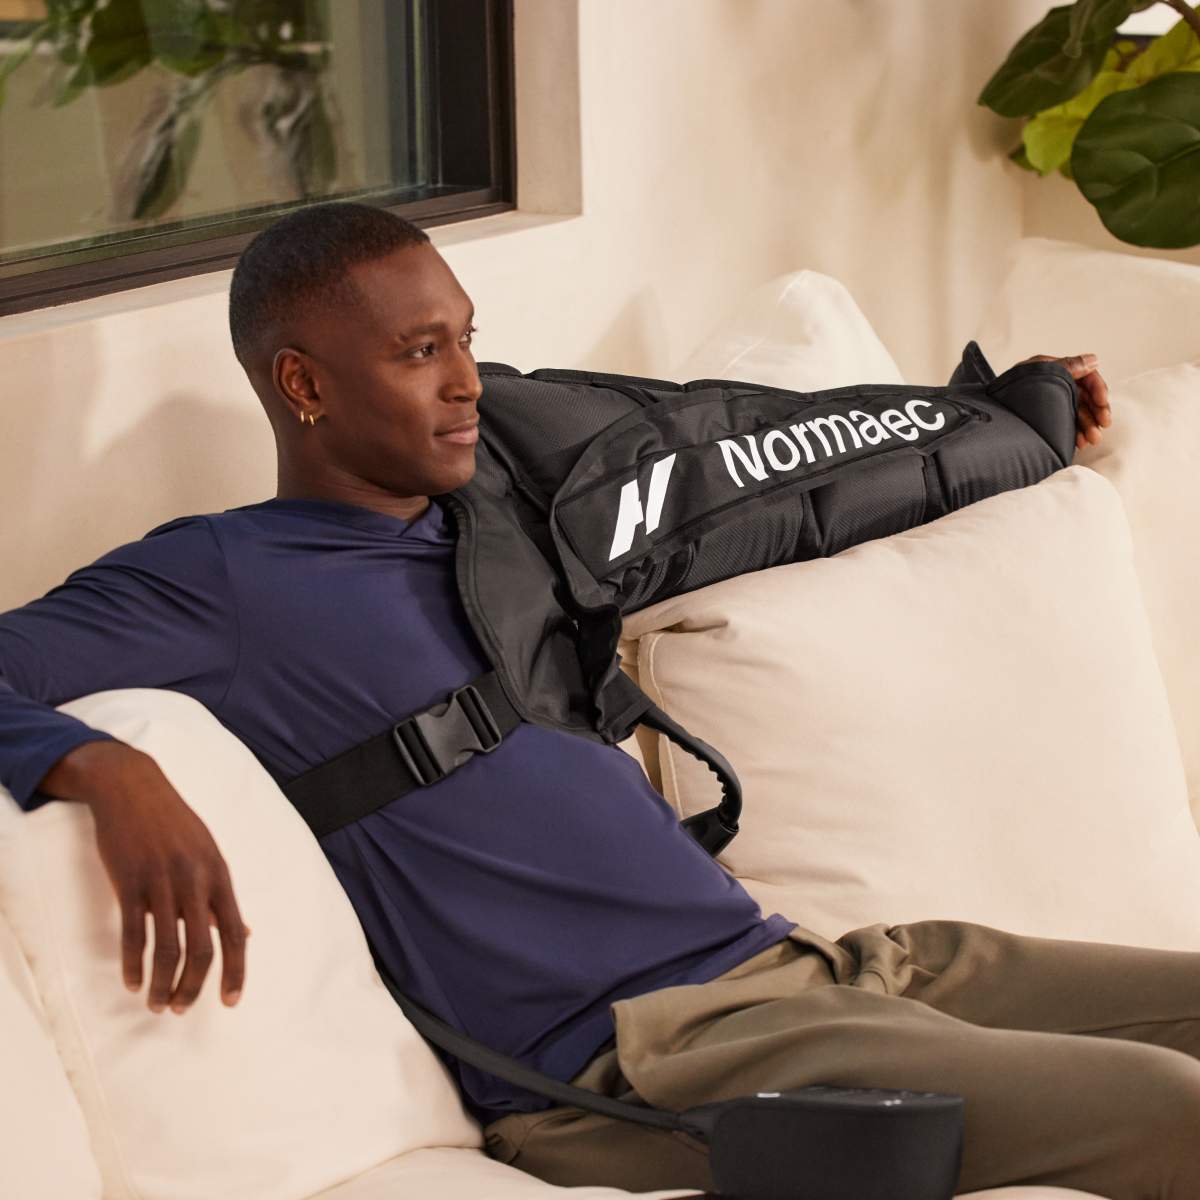 New Original Normatec 4 chambers muscle relaxer air pressure